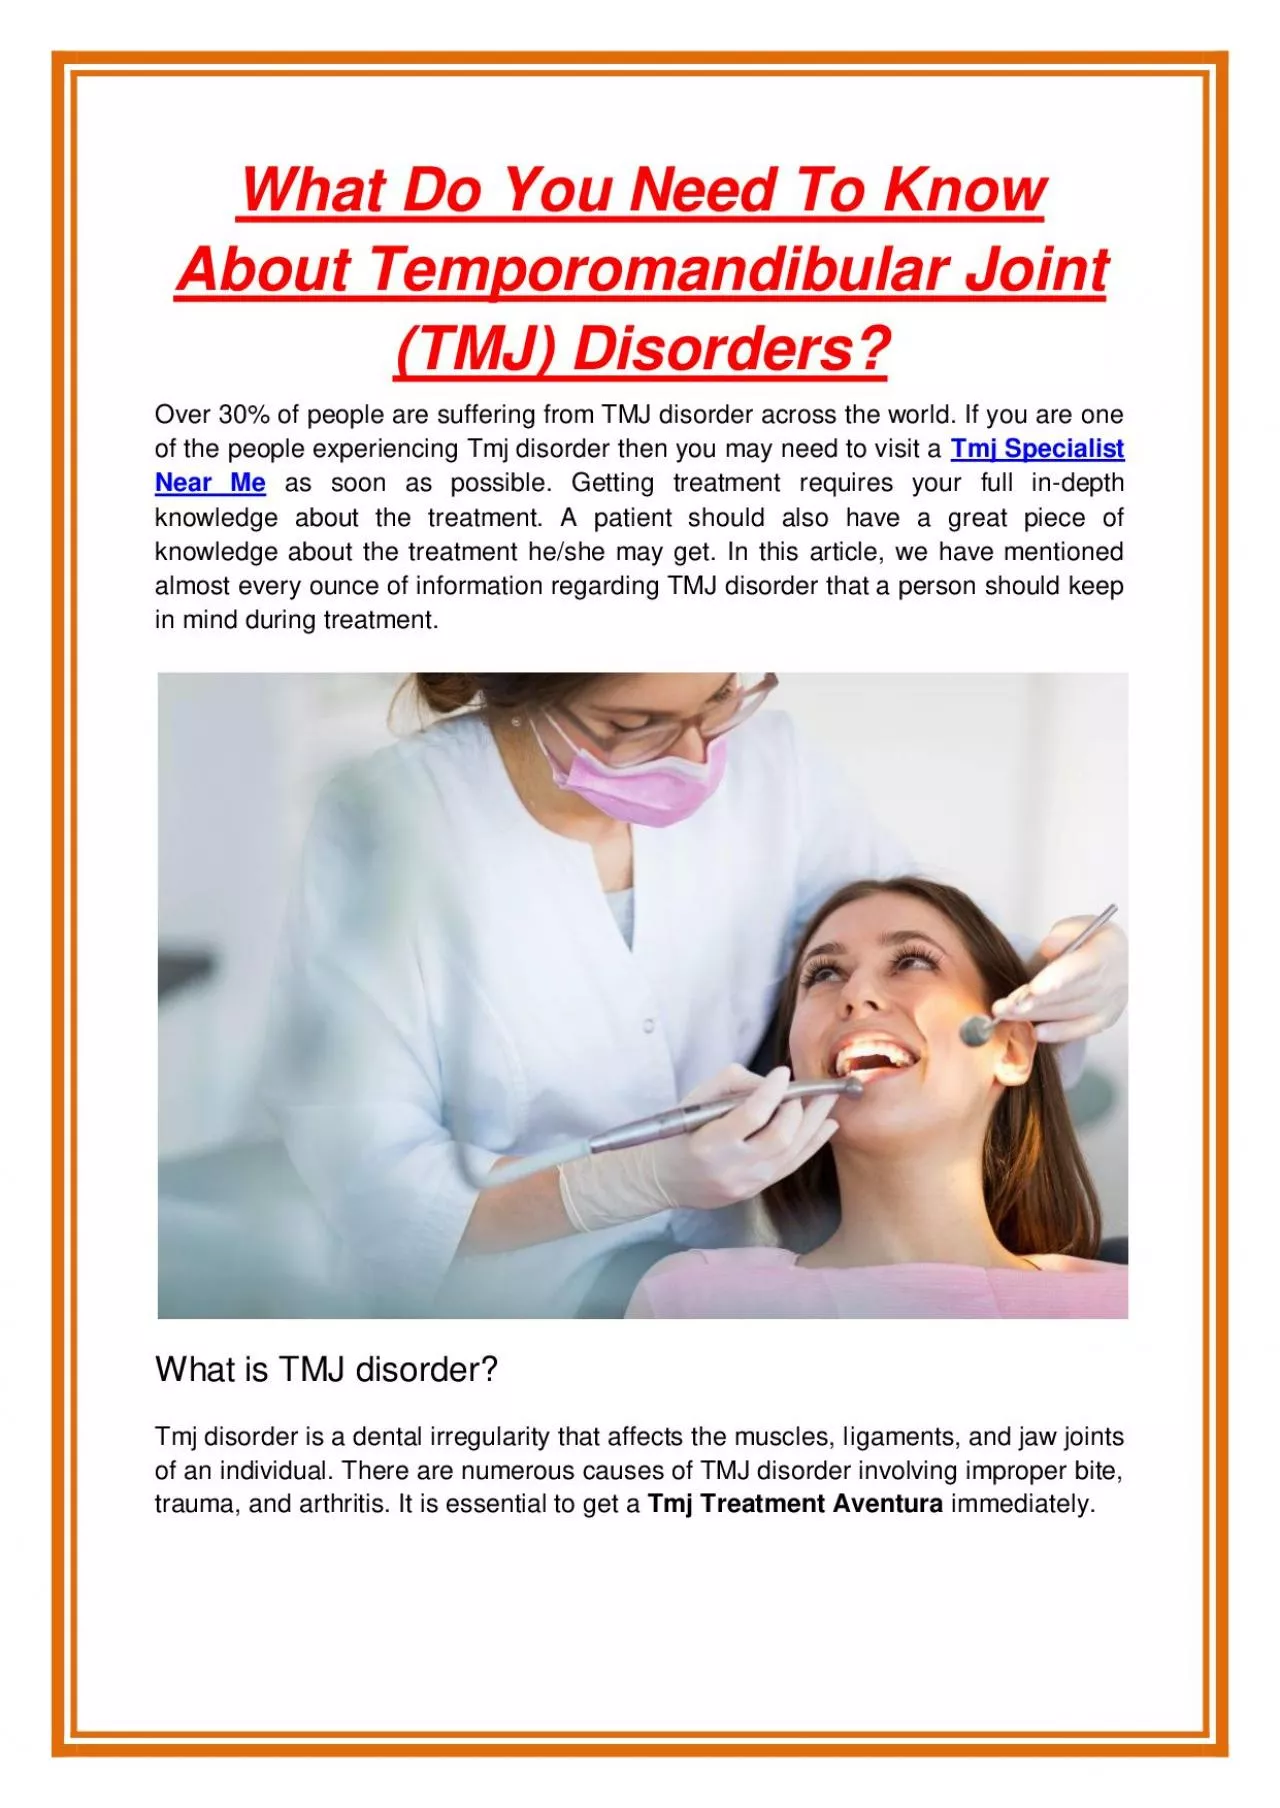 What Do You Need To Know About Temporomandibular Joint (TMJ) Disorders?